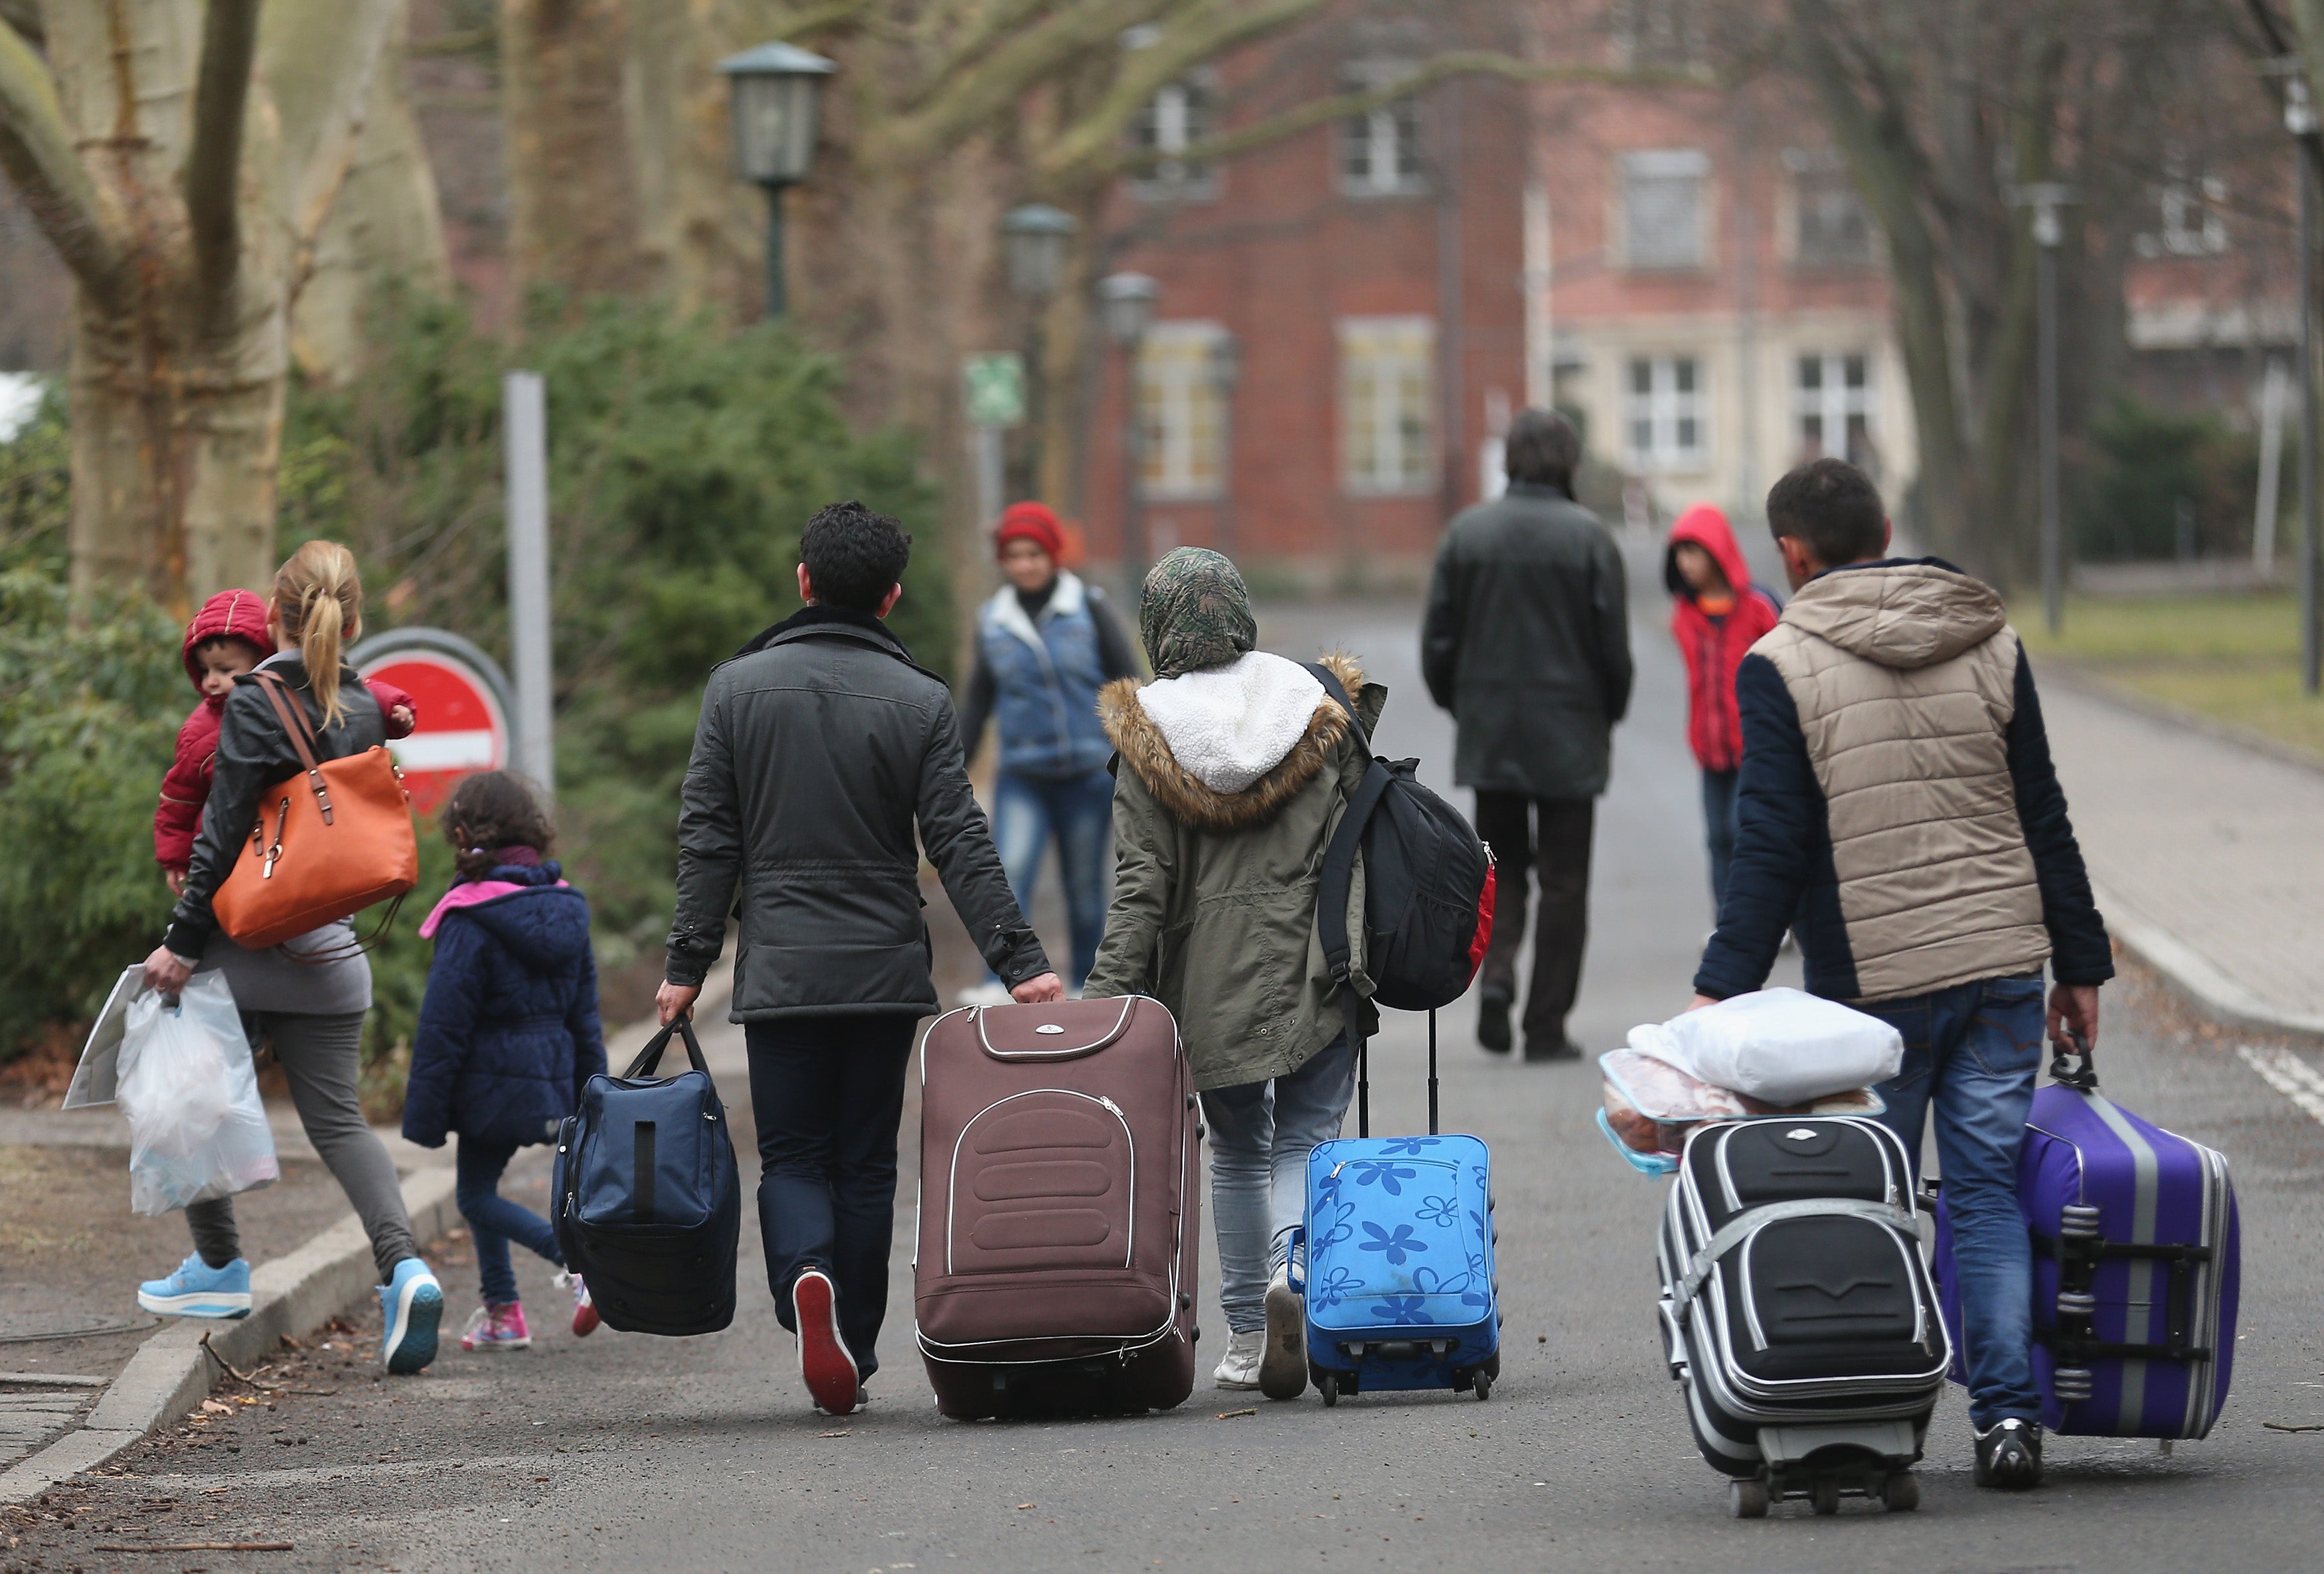 People pulling suitcases arrive at the Berlin refugee registration centre